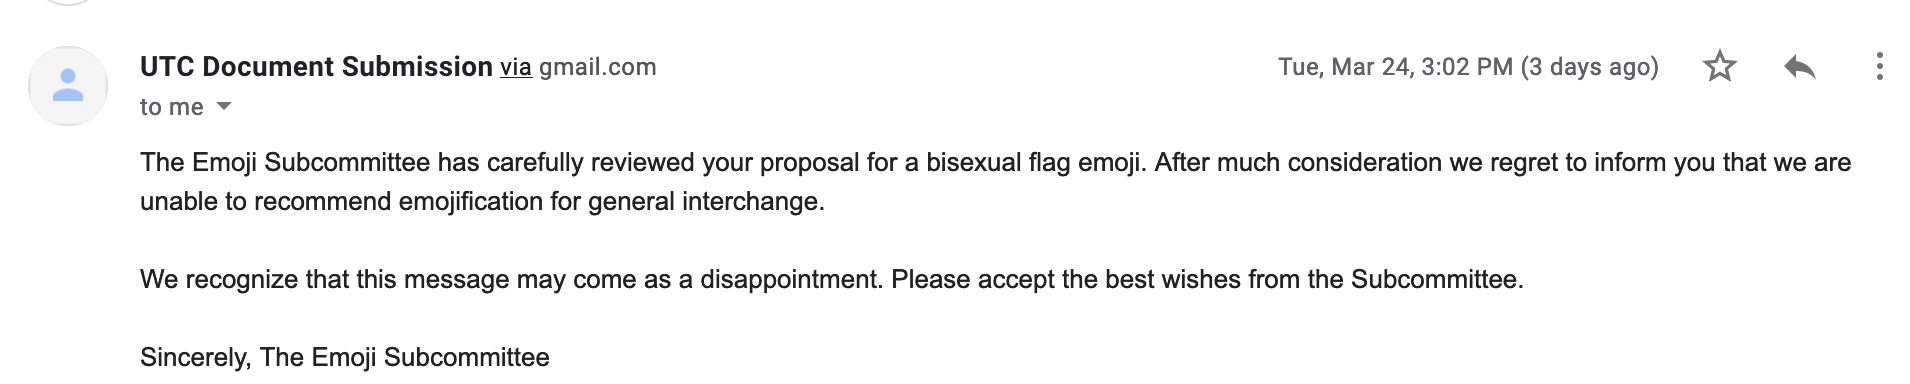 The Emoji Subcommittee has carefully reviewed your proposal for a bisexual flag emoji. After much consideration we regret to inform you that we are unable to recommend emojification for general interchange. We recognize that this message may come as a disappointment. Please accept the best wishes from the Subcommittee. Sincerely, The Emoji Subcommittee